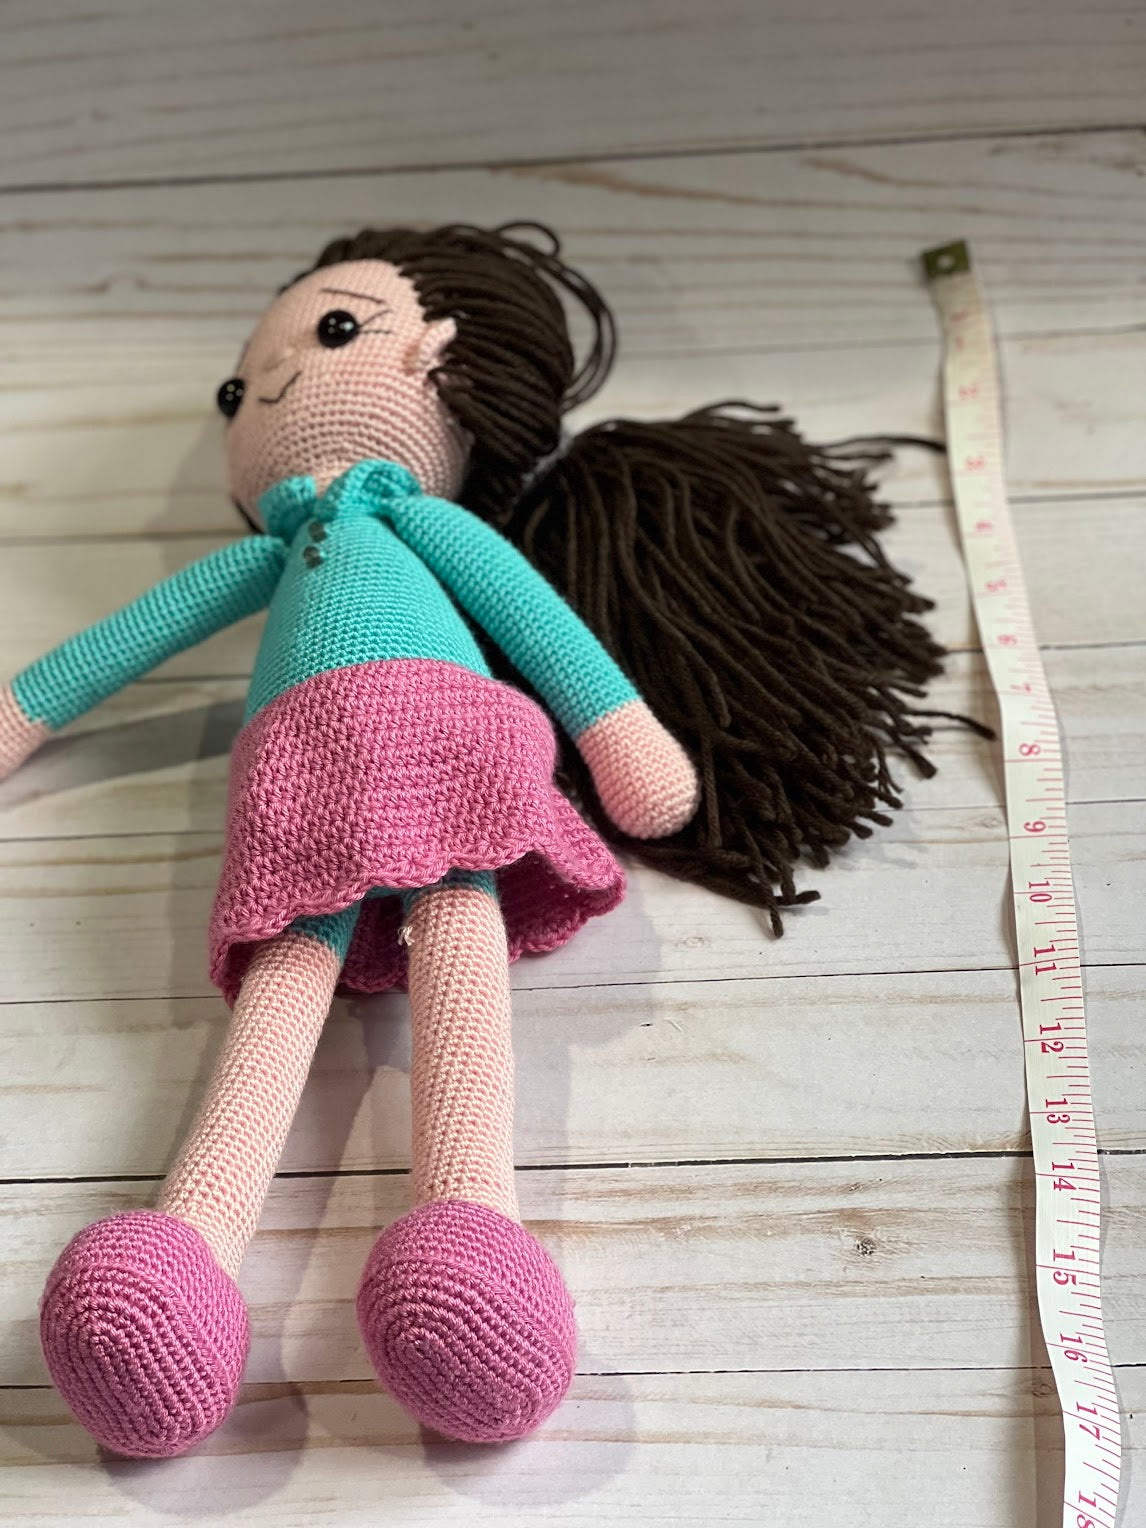 Big Doll With Long Hair - Crochet Knitted Amigurumi Toy